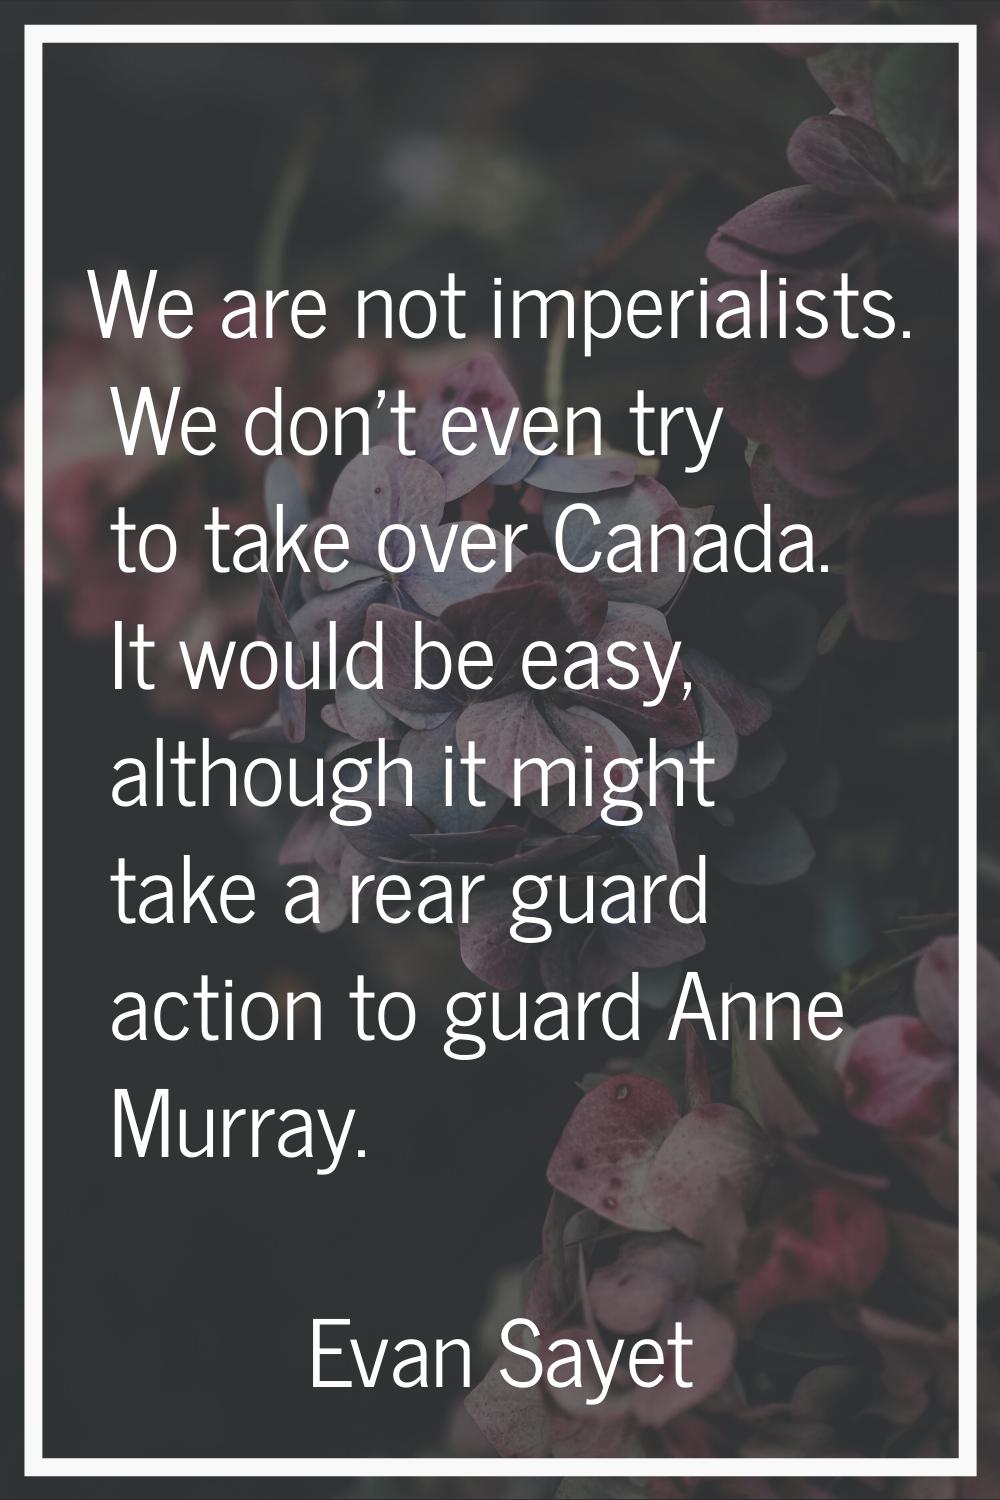 We are not imperialists. We don't even try to take over Canada. It would be easy, although it might